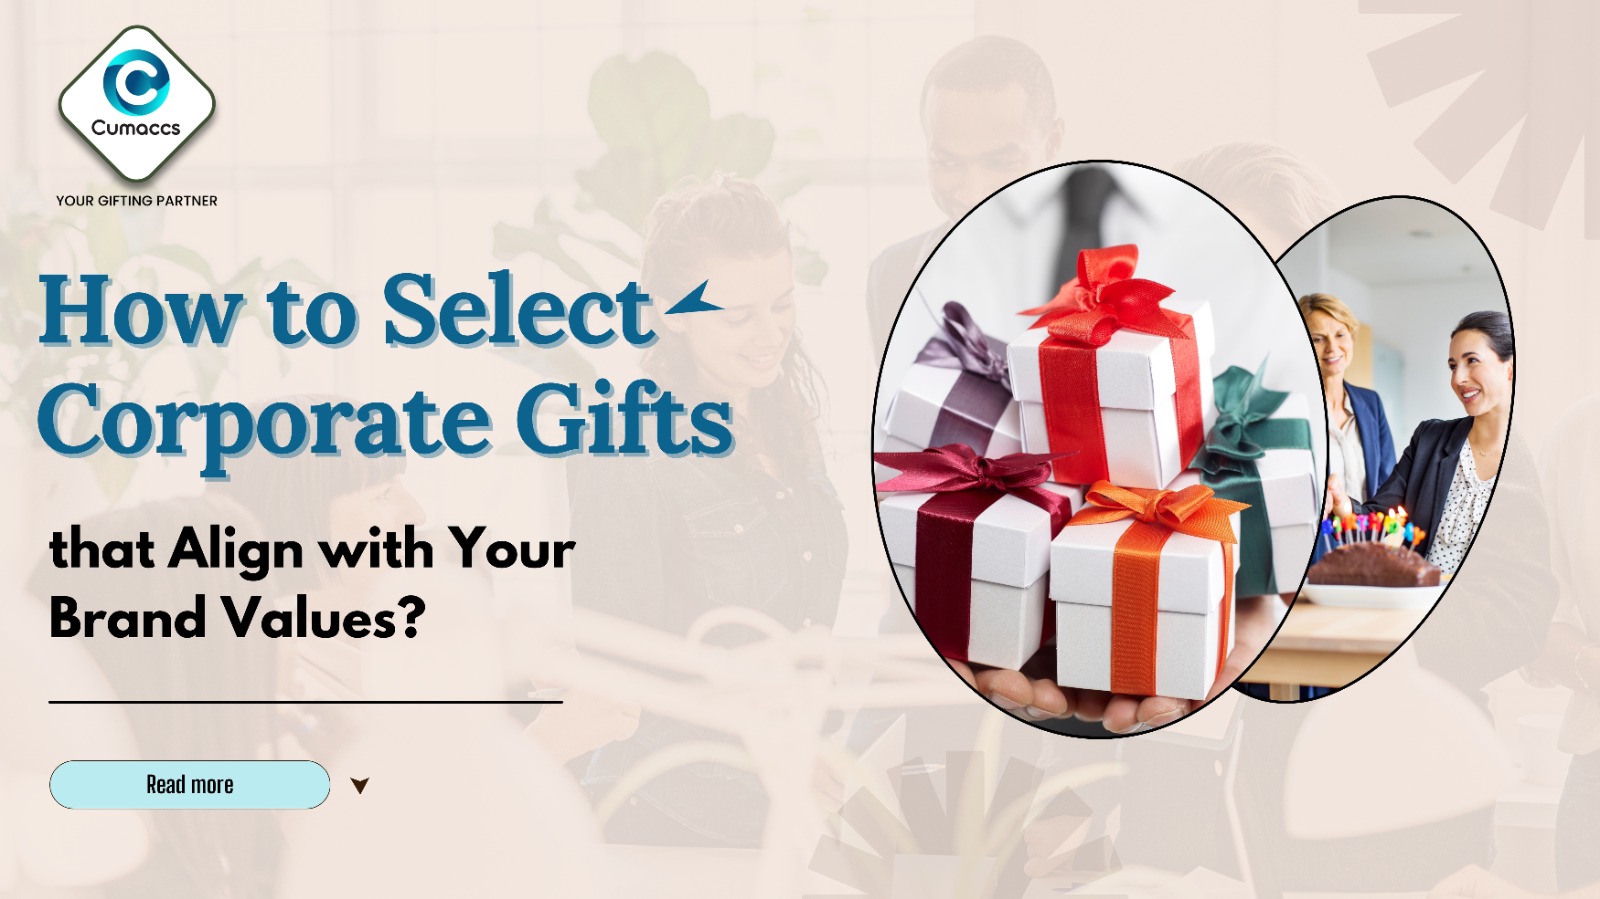 How to Select Corporate Gifts that Align with Your Brand Values?